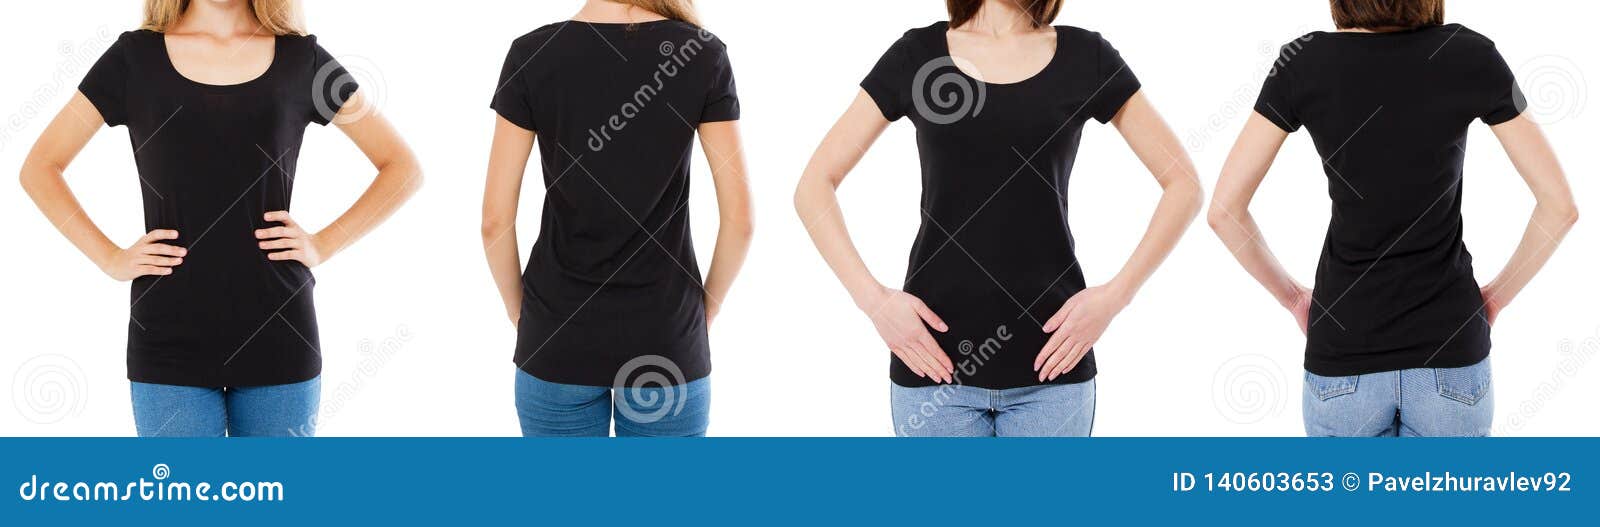 Download Two Woman In Black T-shirt : Cropped Image Front And Rear ...